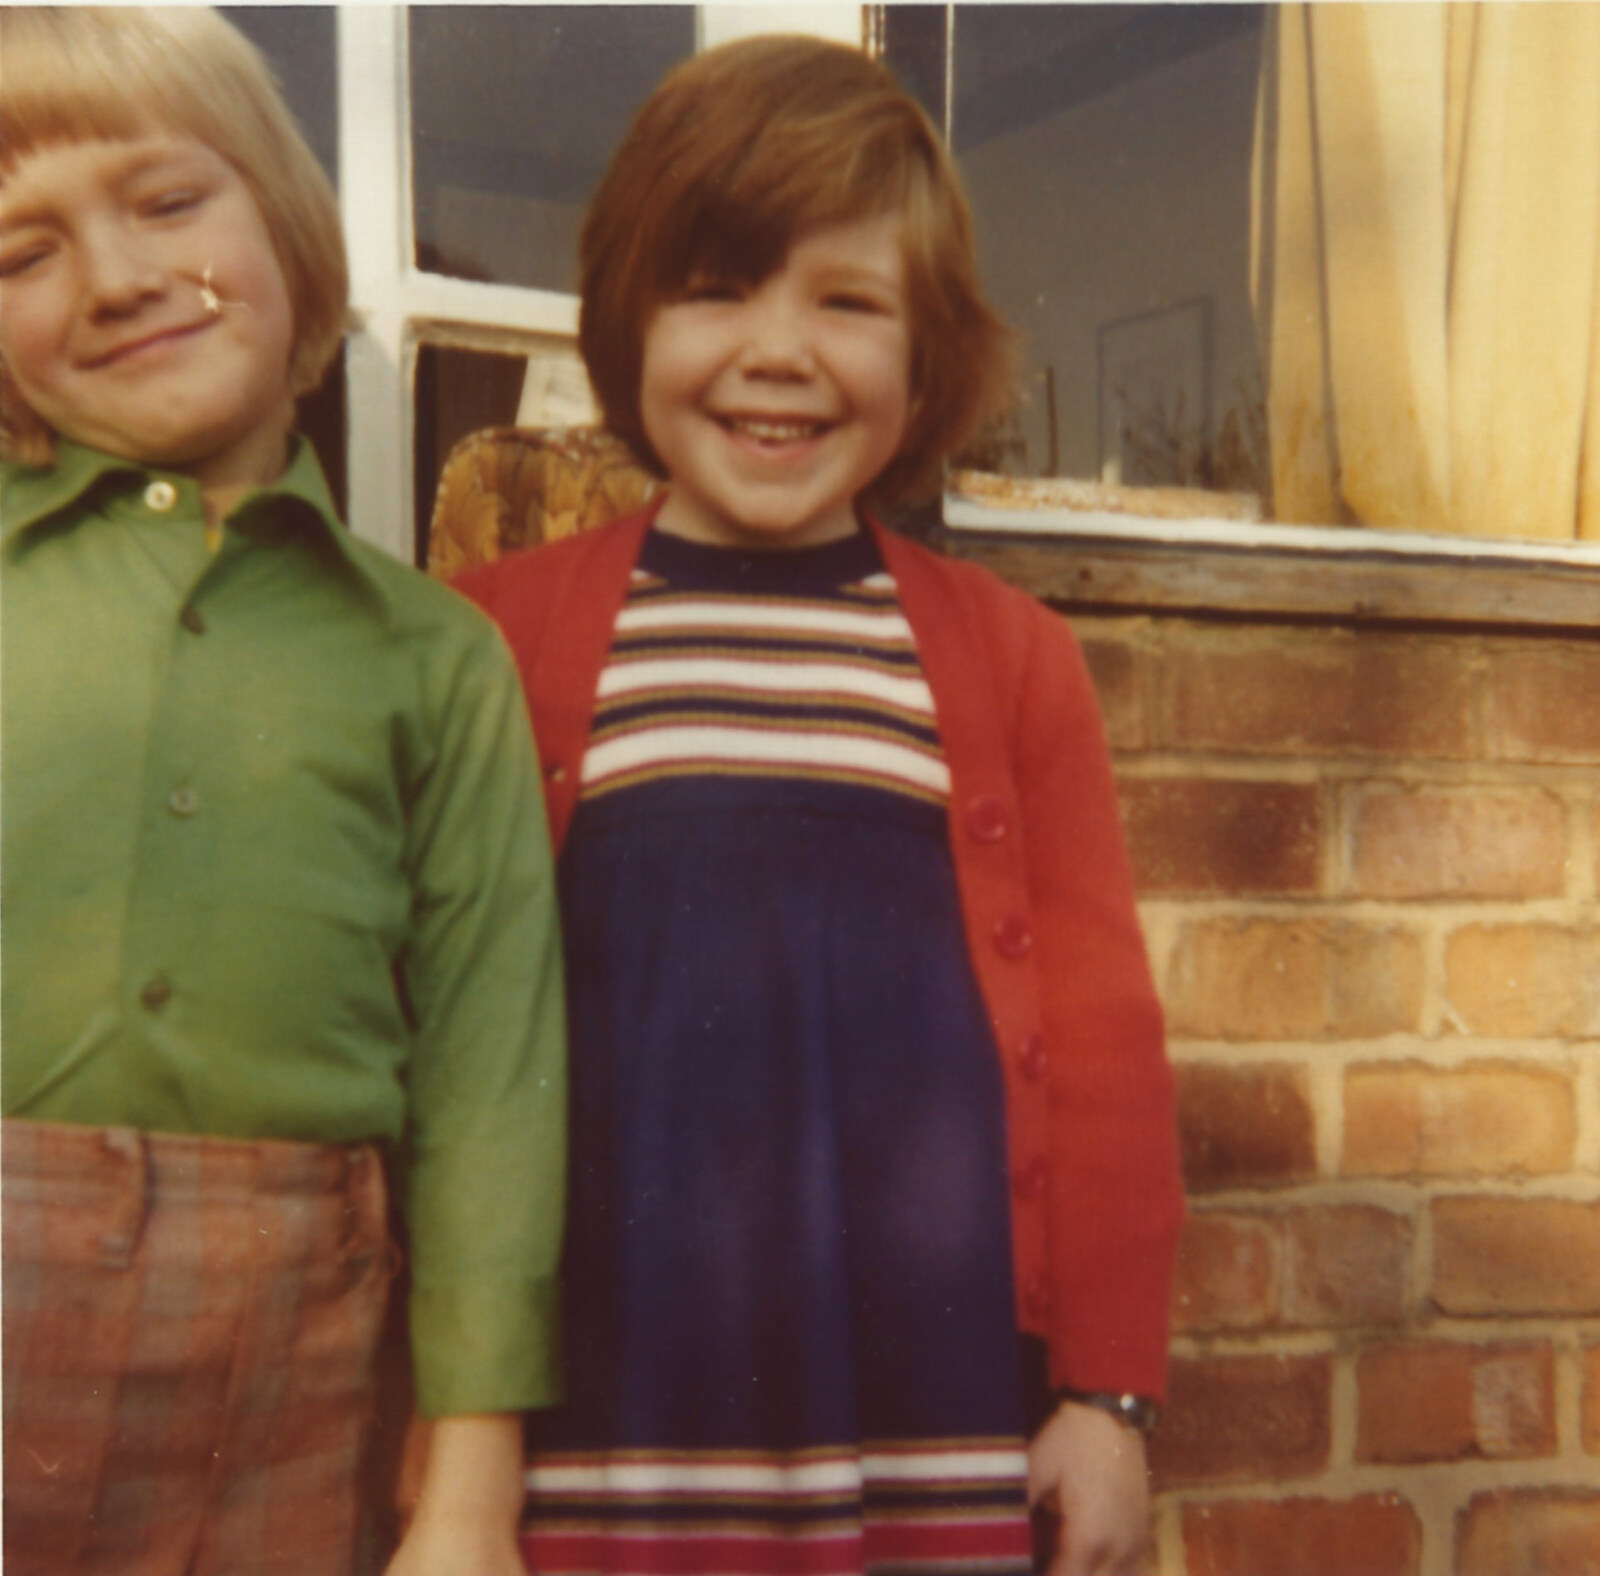 Family History: The 1970s, Timperley and Sandbach, Cheshire - 24th January 2020: Nosher and Sis